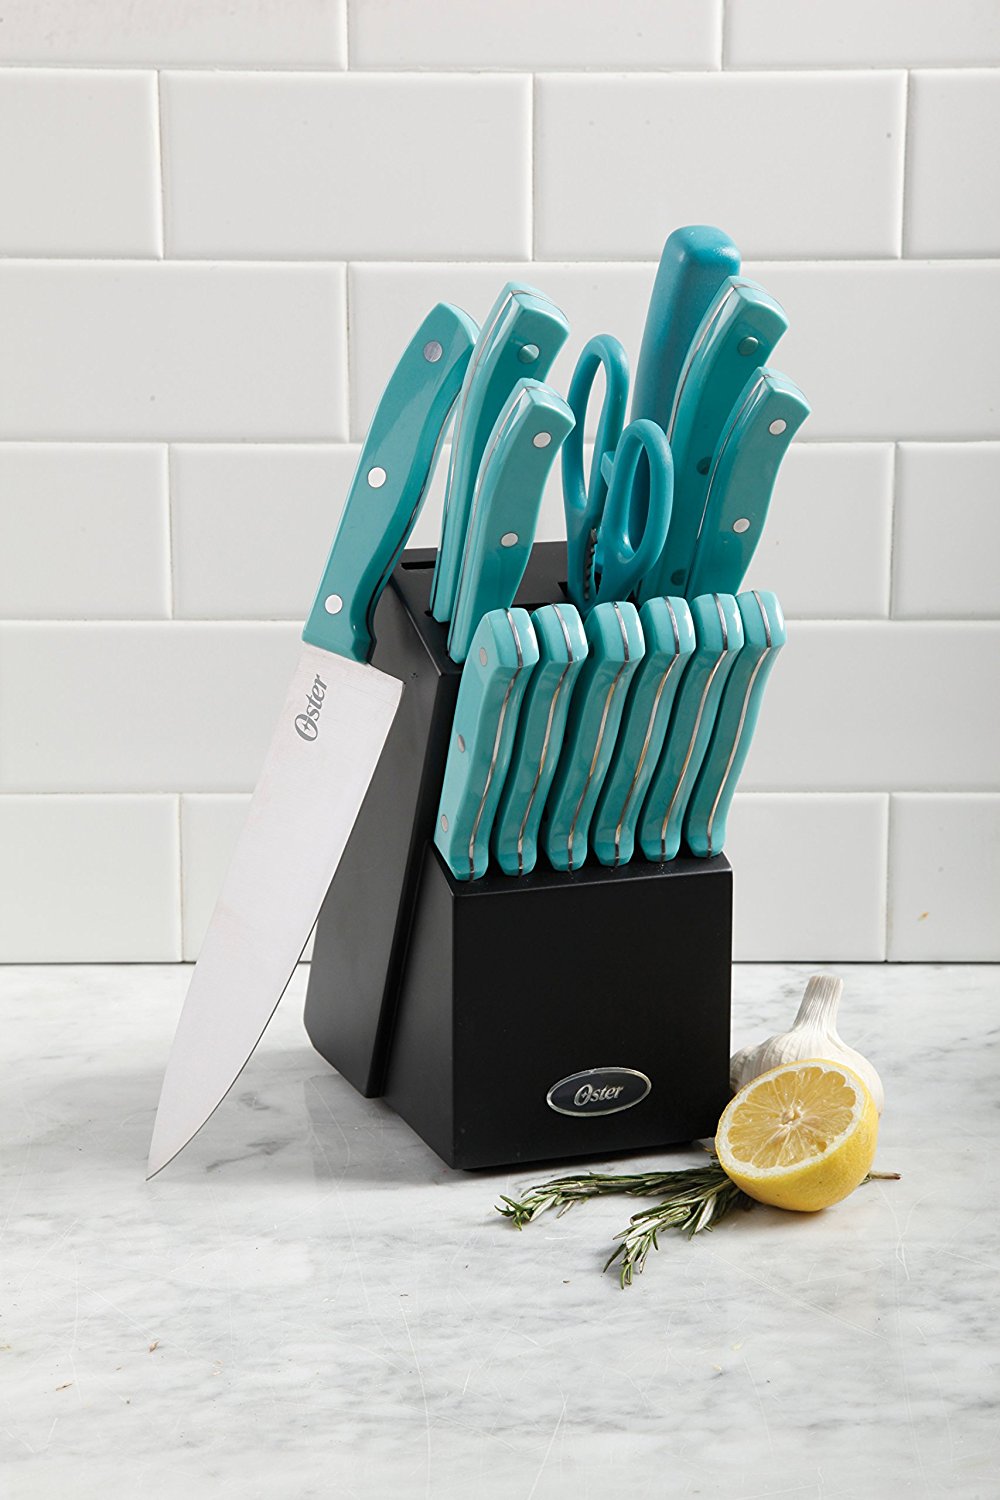 Oster Evansville Stainless Steel Cutlery Set